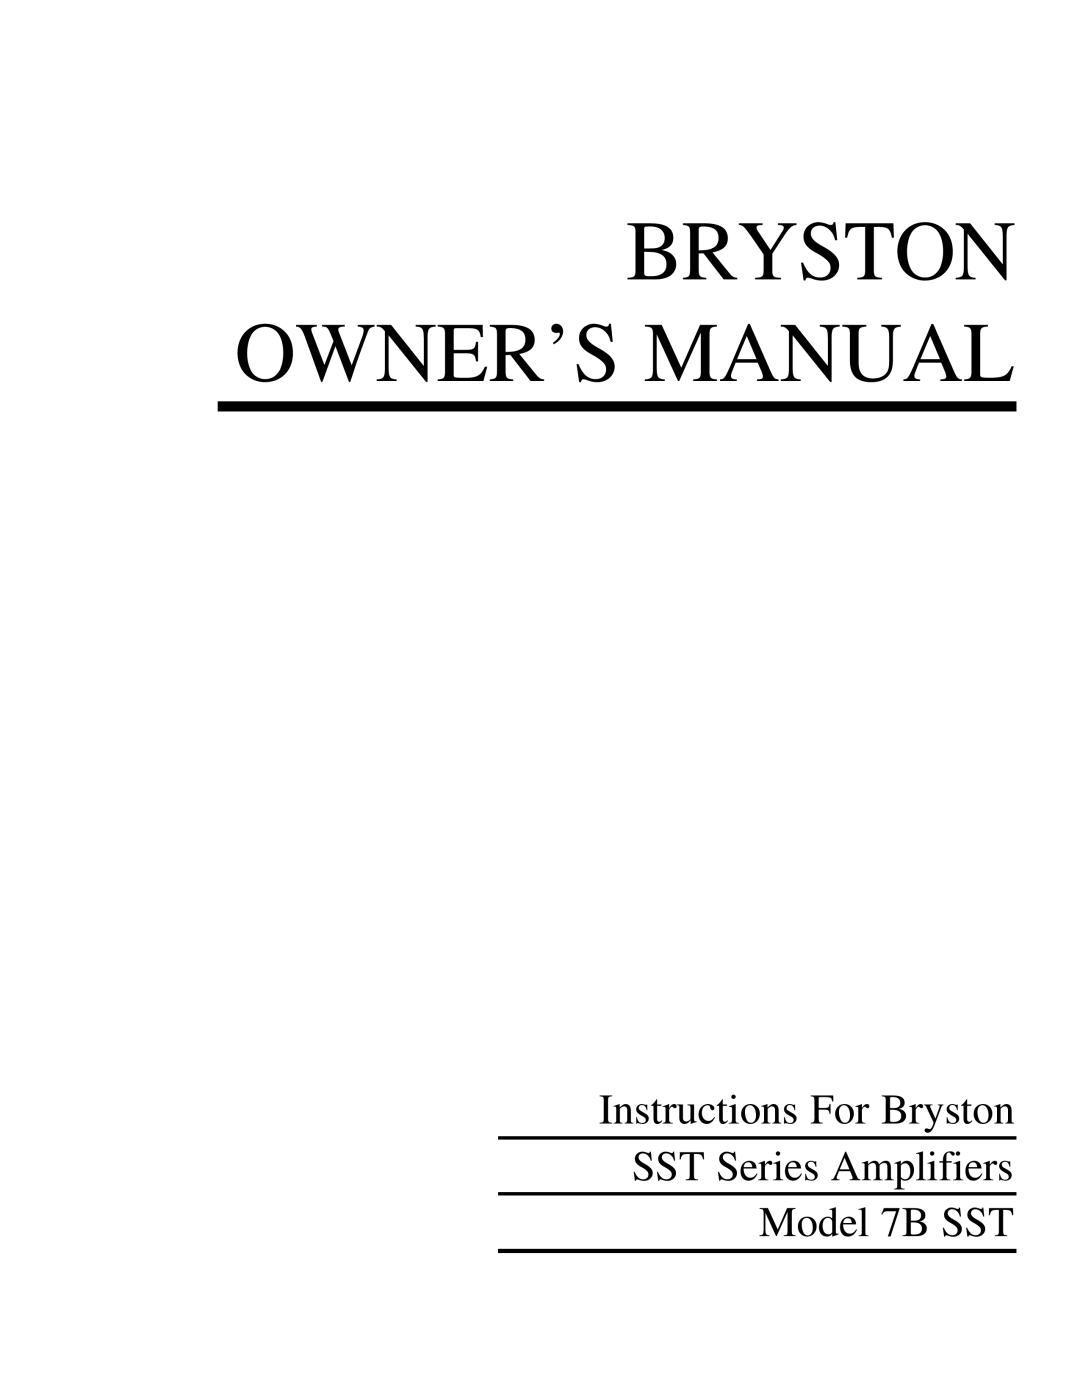 Bryston owner manual Instructions For Bryston SST Series Amplifiers, Model 7B SST 